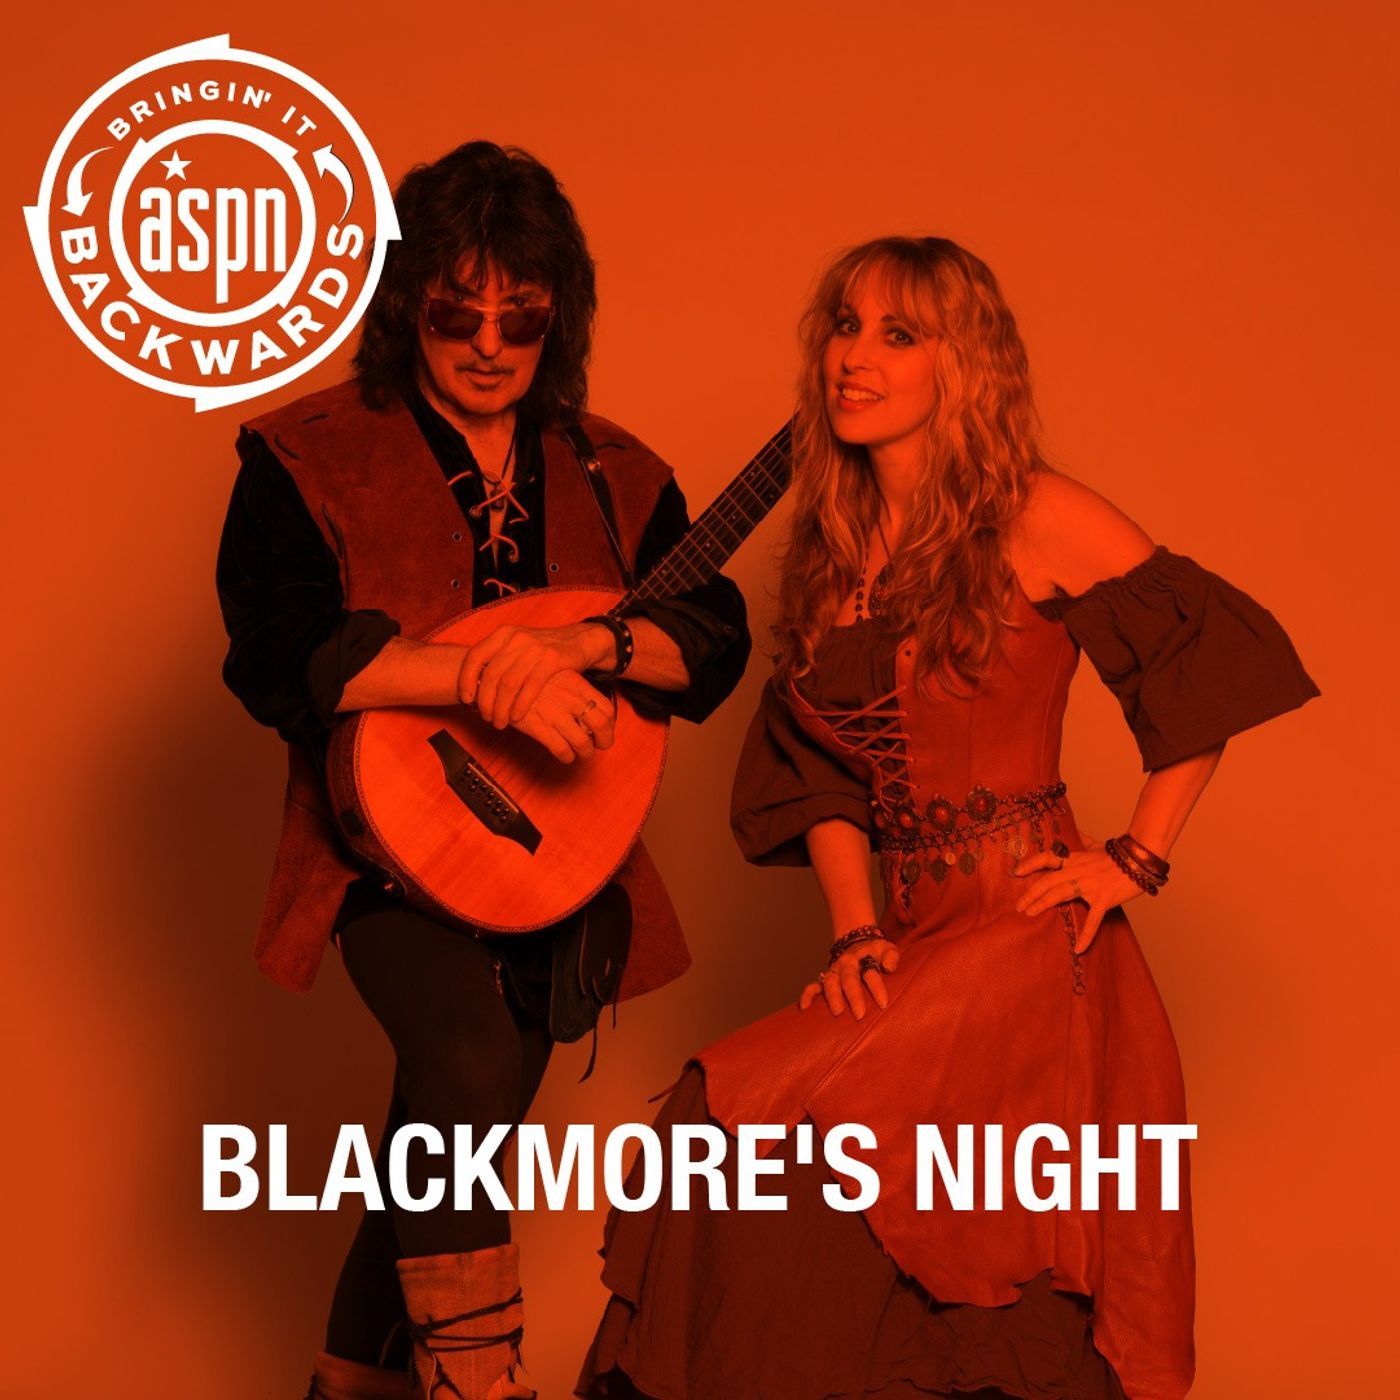 Interview with Blackmore's Night